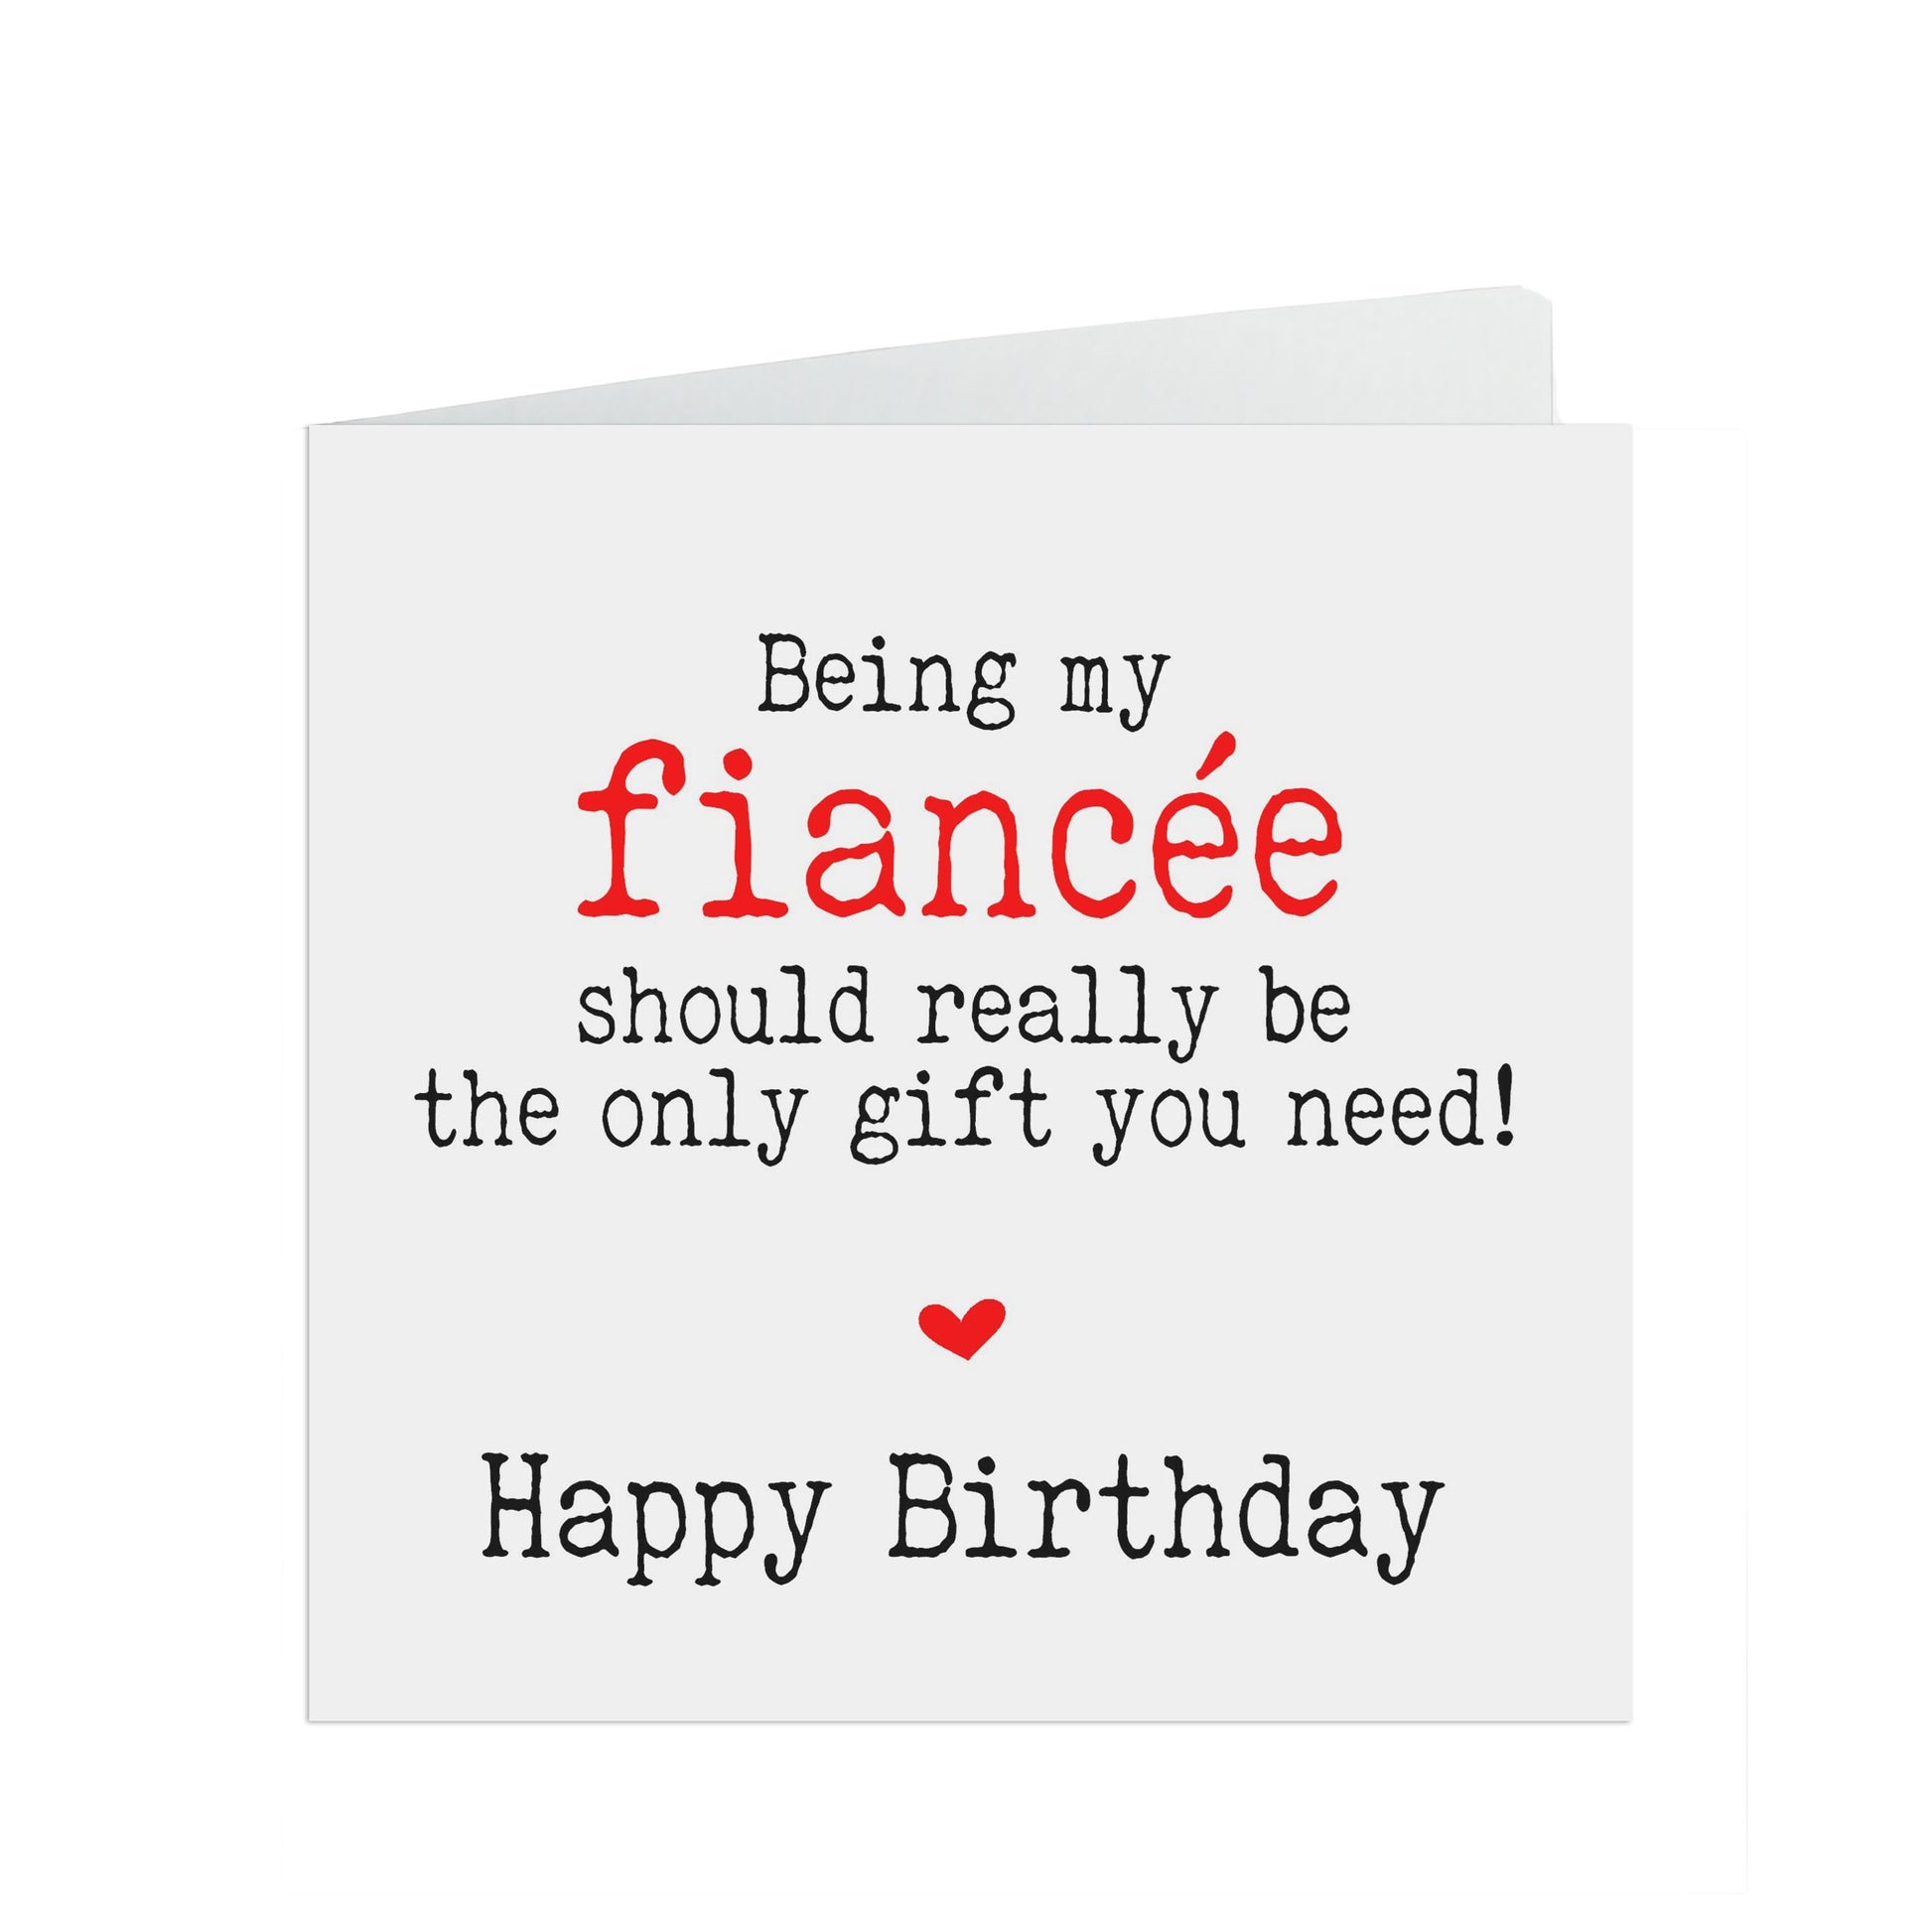 Being My Fiancée Should Really Be The Only Gift You Need! Funny Birthday Card